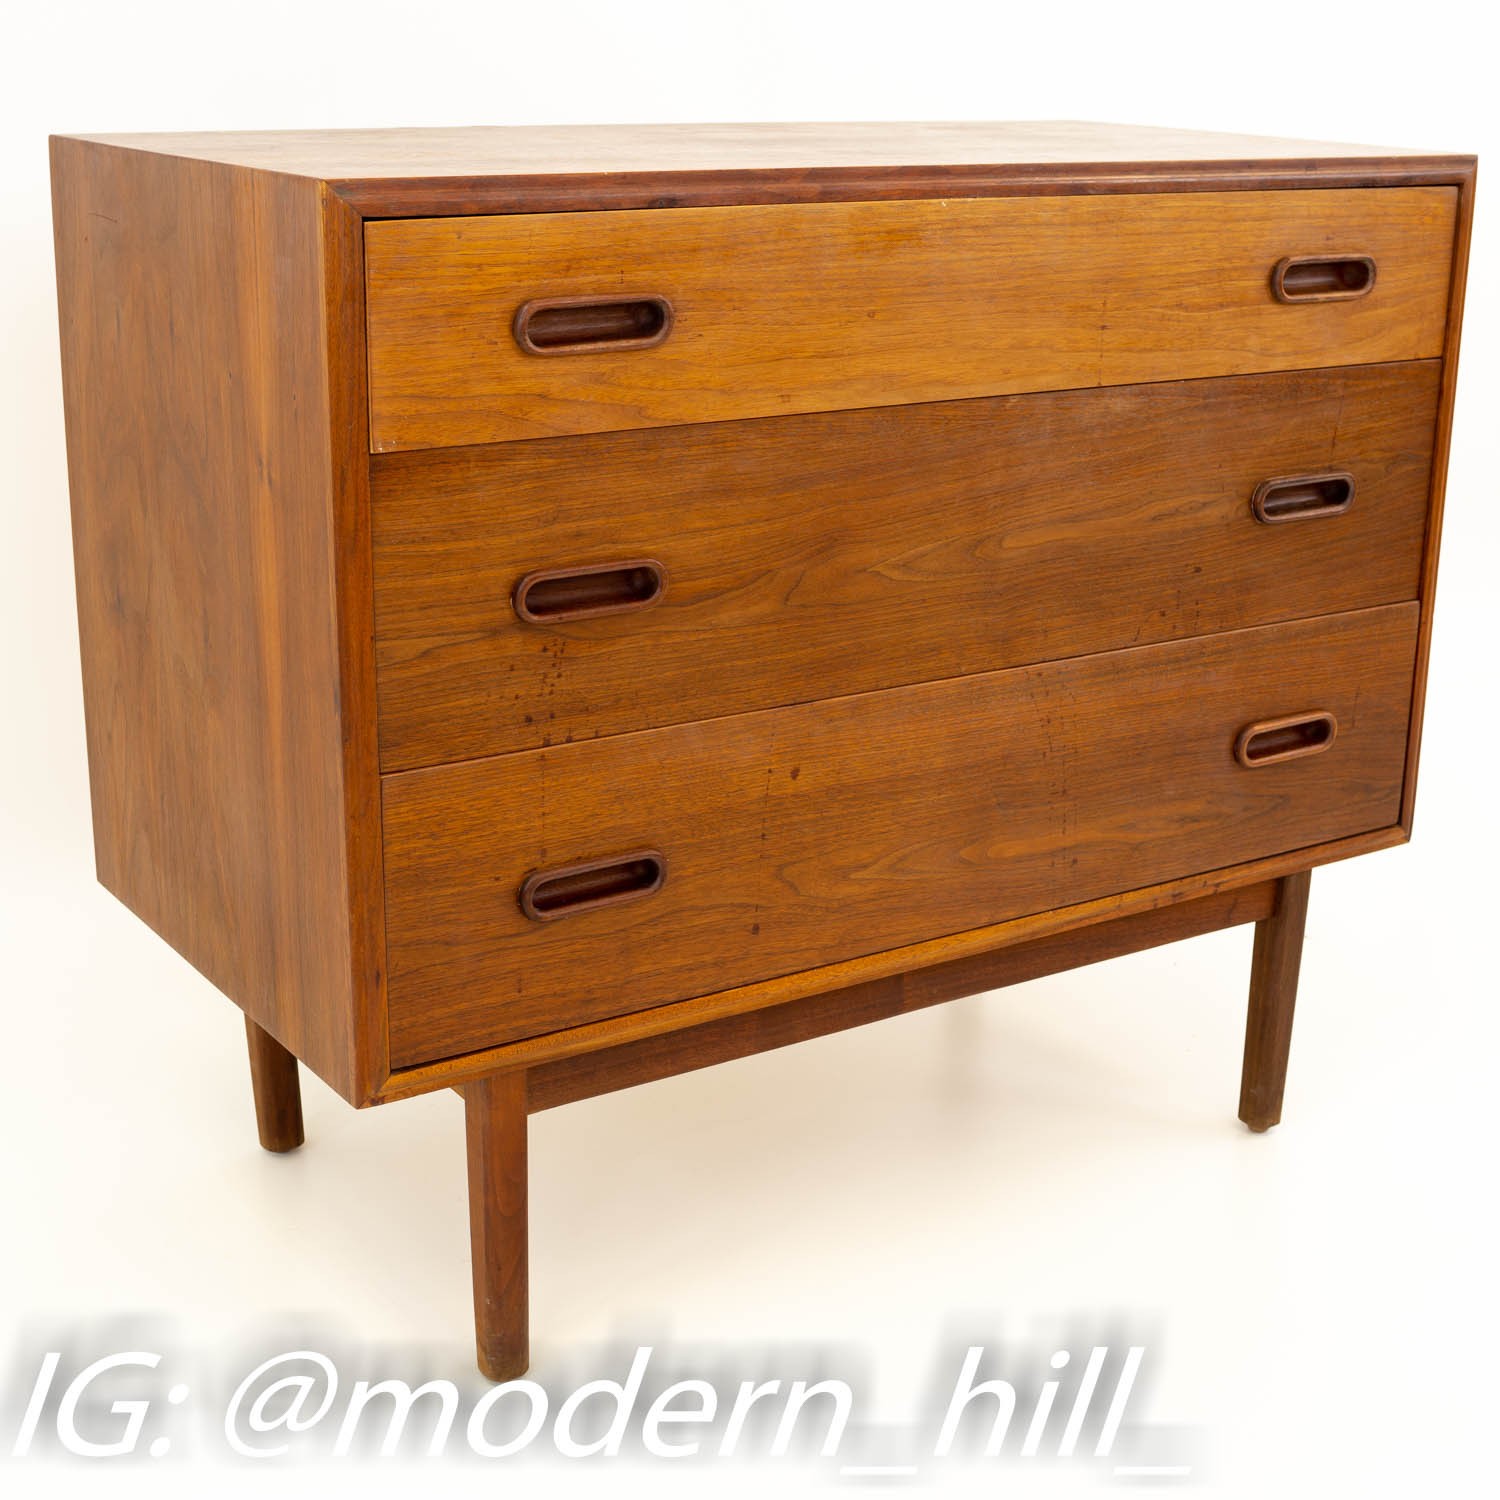 Jack Cartwright for Founders Mid Century Modern Danish Style 3 Drawer Chest of Drawers - Matching Pair